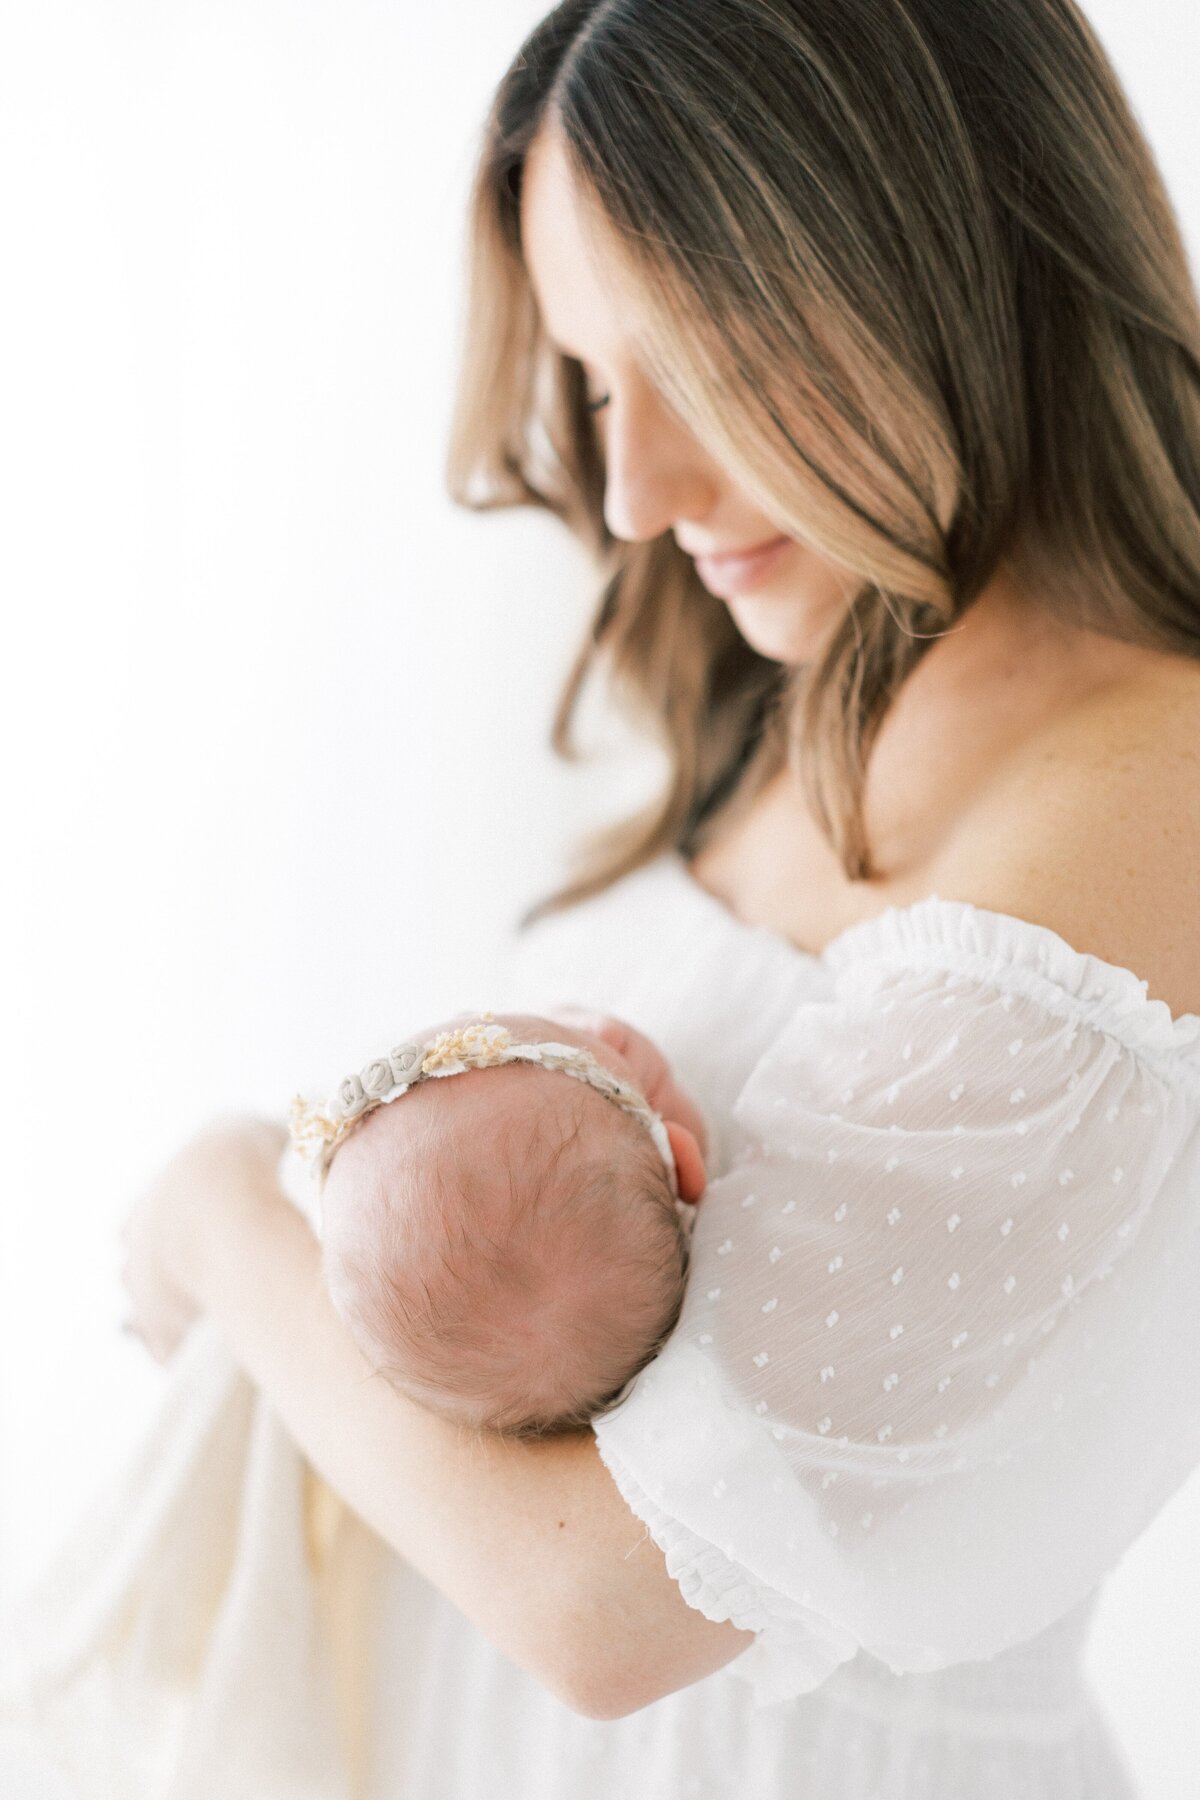 image of new mom wearing a white chiffon dress holding and looking at her week old baby captured by Dallas Newborn Photographer Amanda Carter